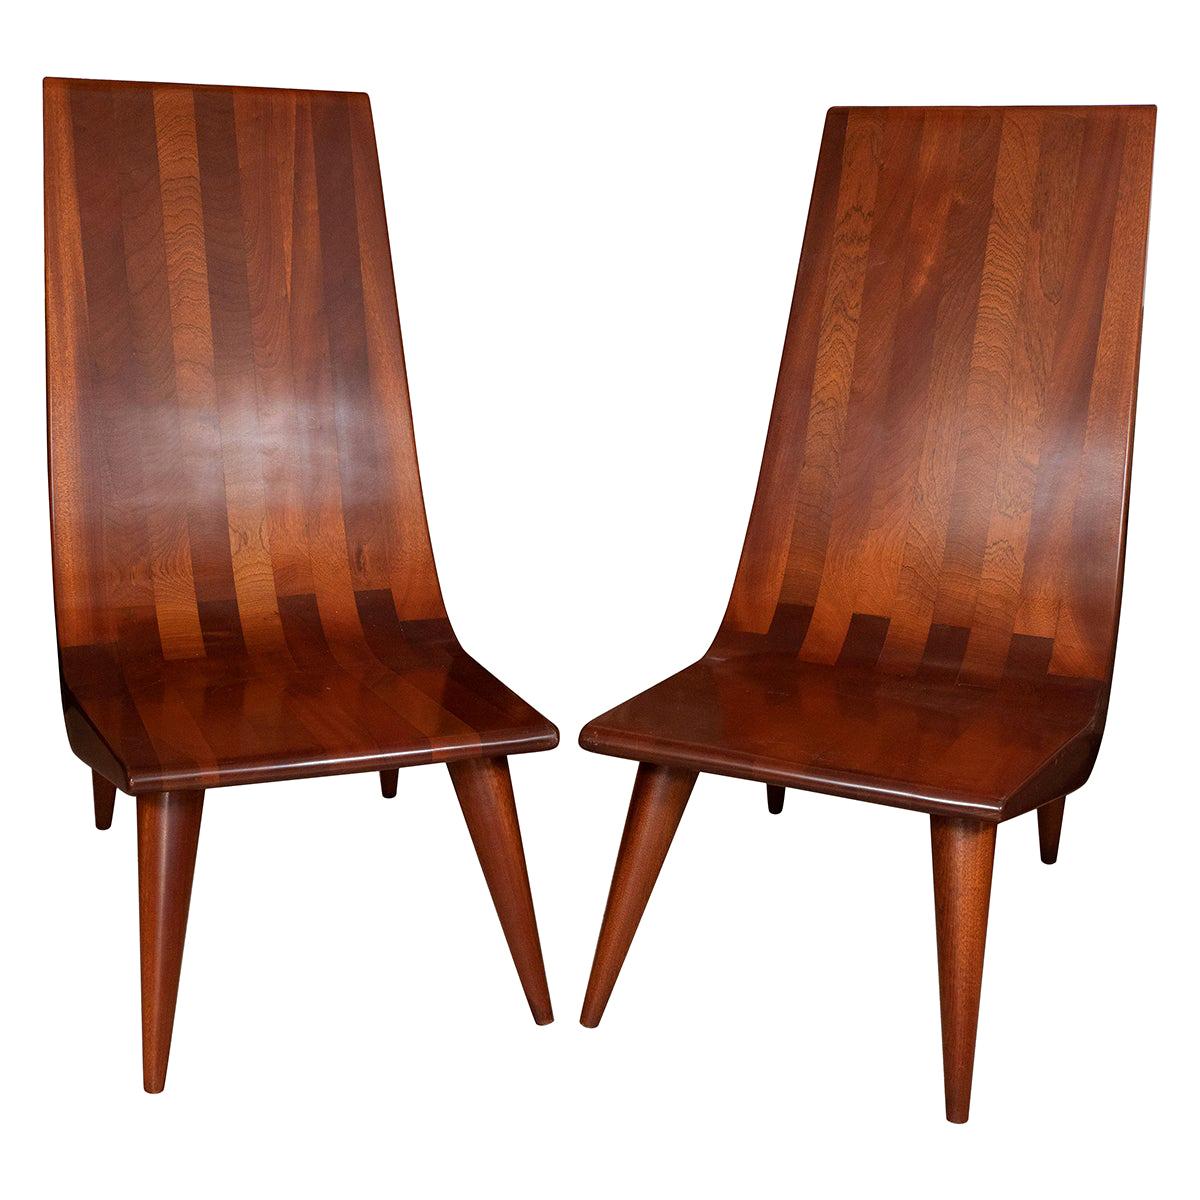 Pair of High Back African Mahogany Slipper Chairs